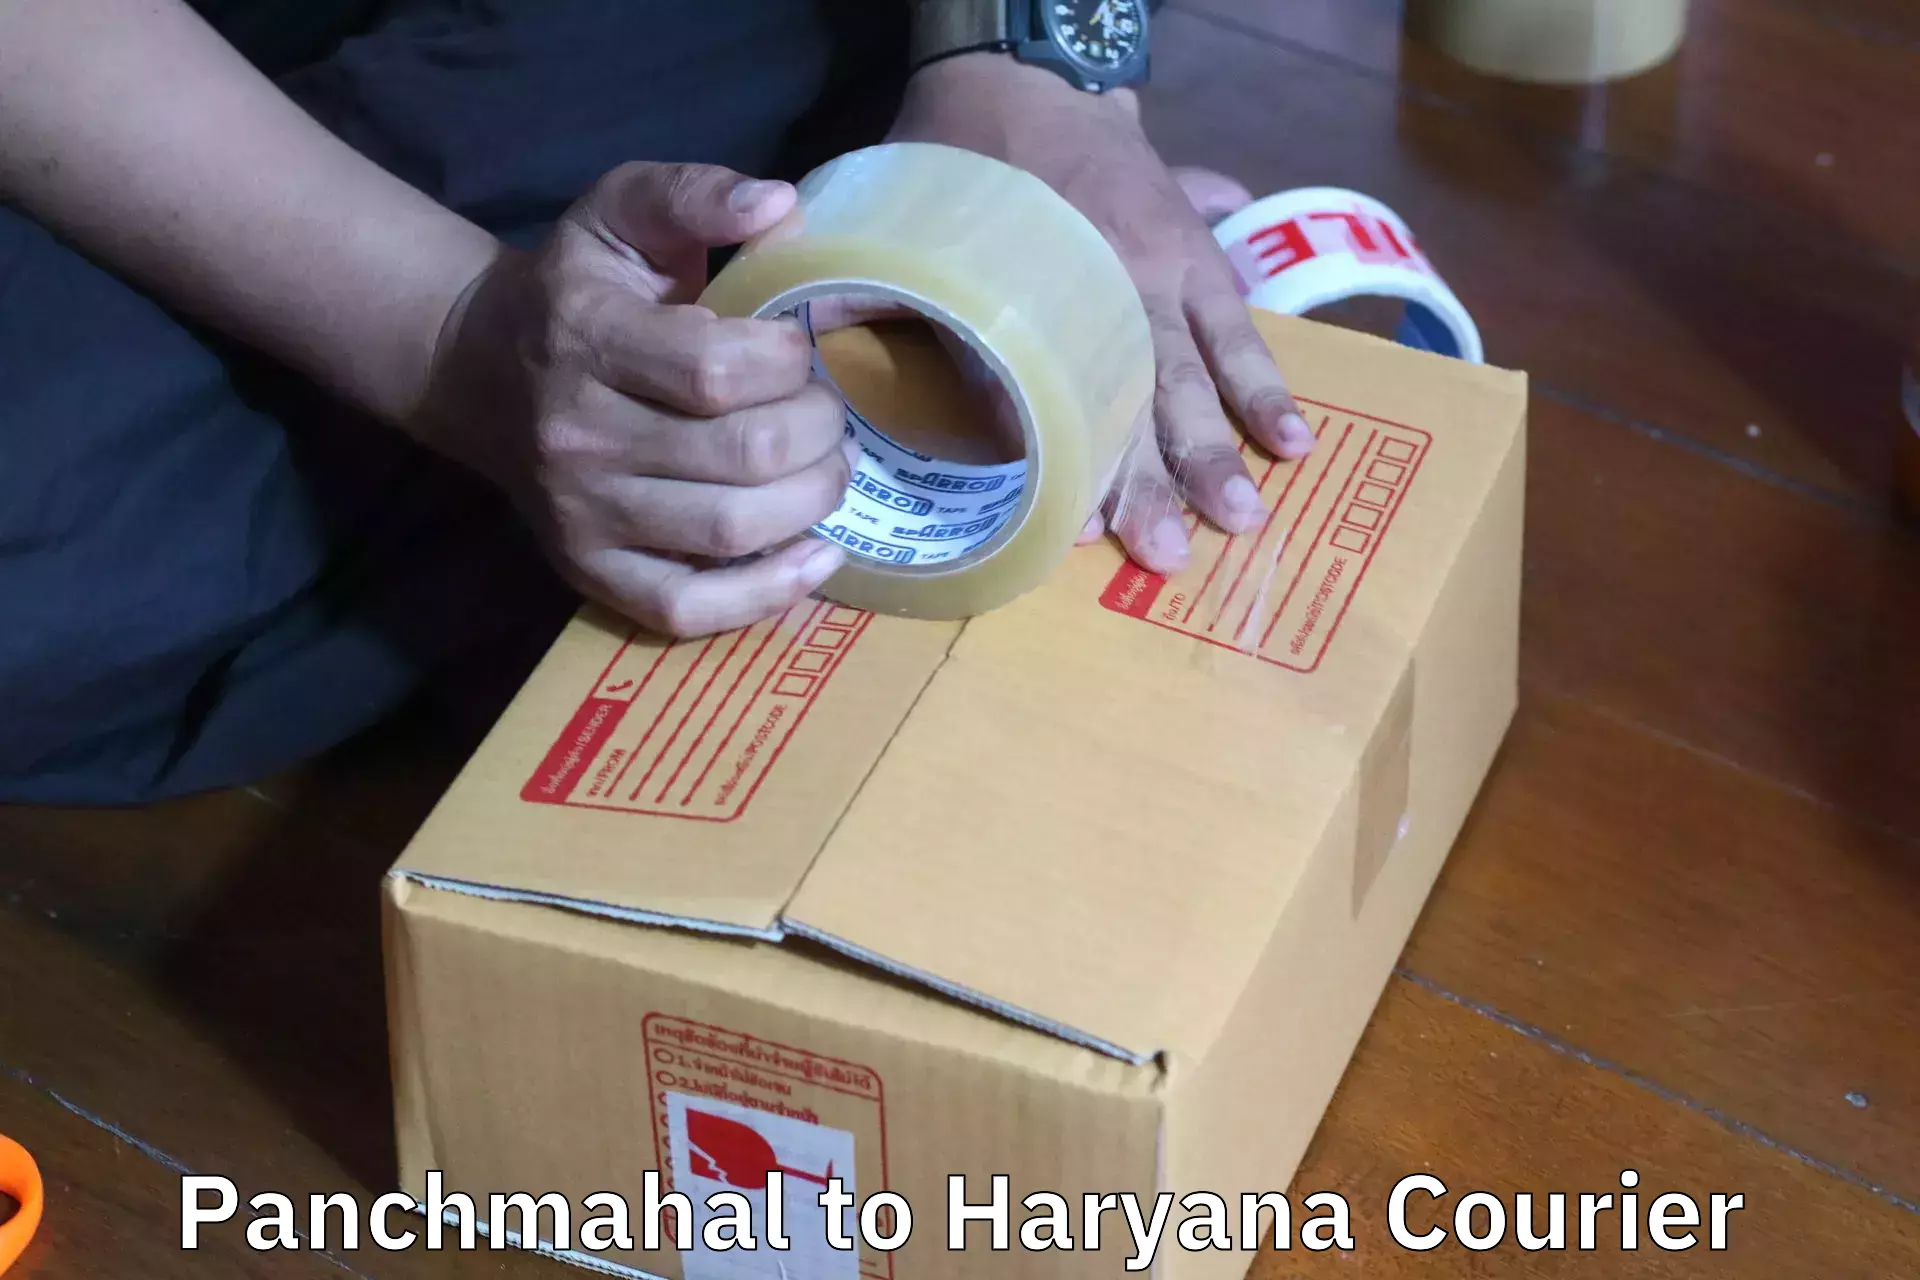 Home goods moving company Panchmahal to Sonipat